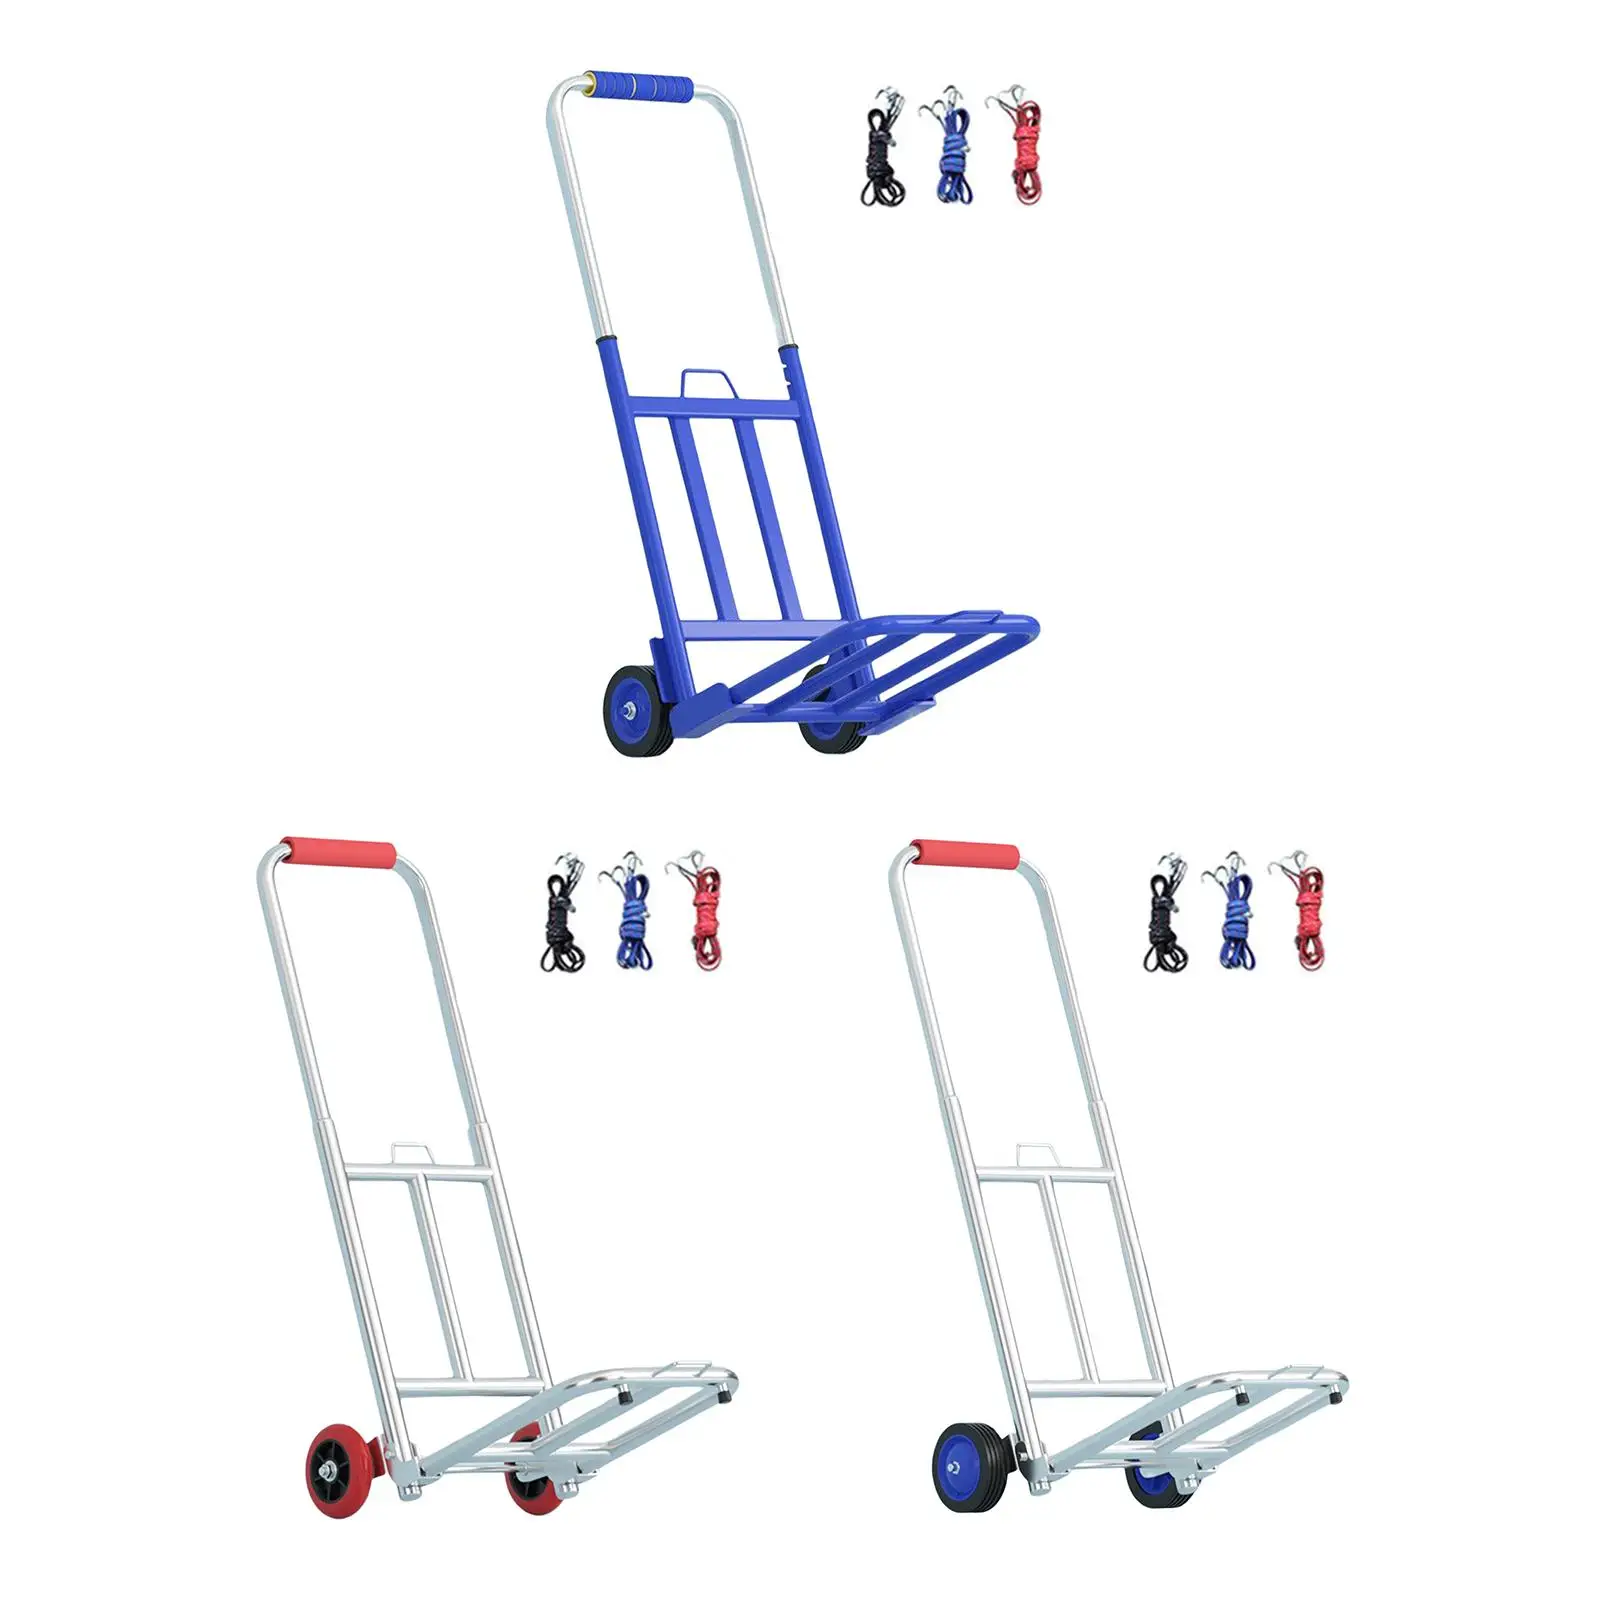 Luggage Cart Utility Cart Rubber Wheels with Rope Foldable Roller Shopping Trolley Folding Hand Truck for Shopping Moving